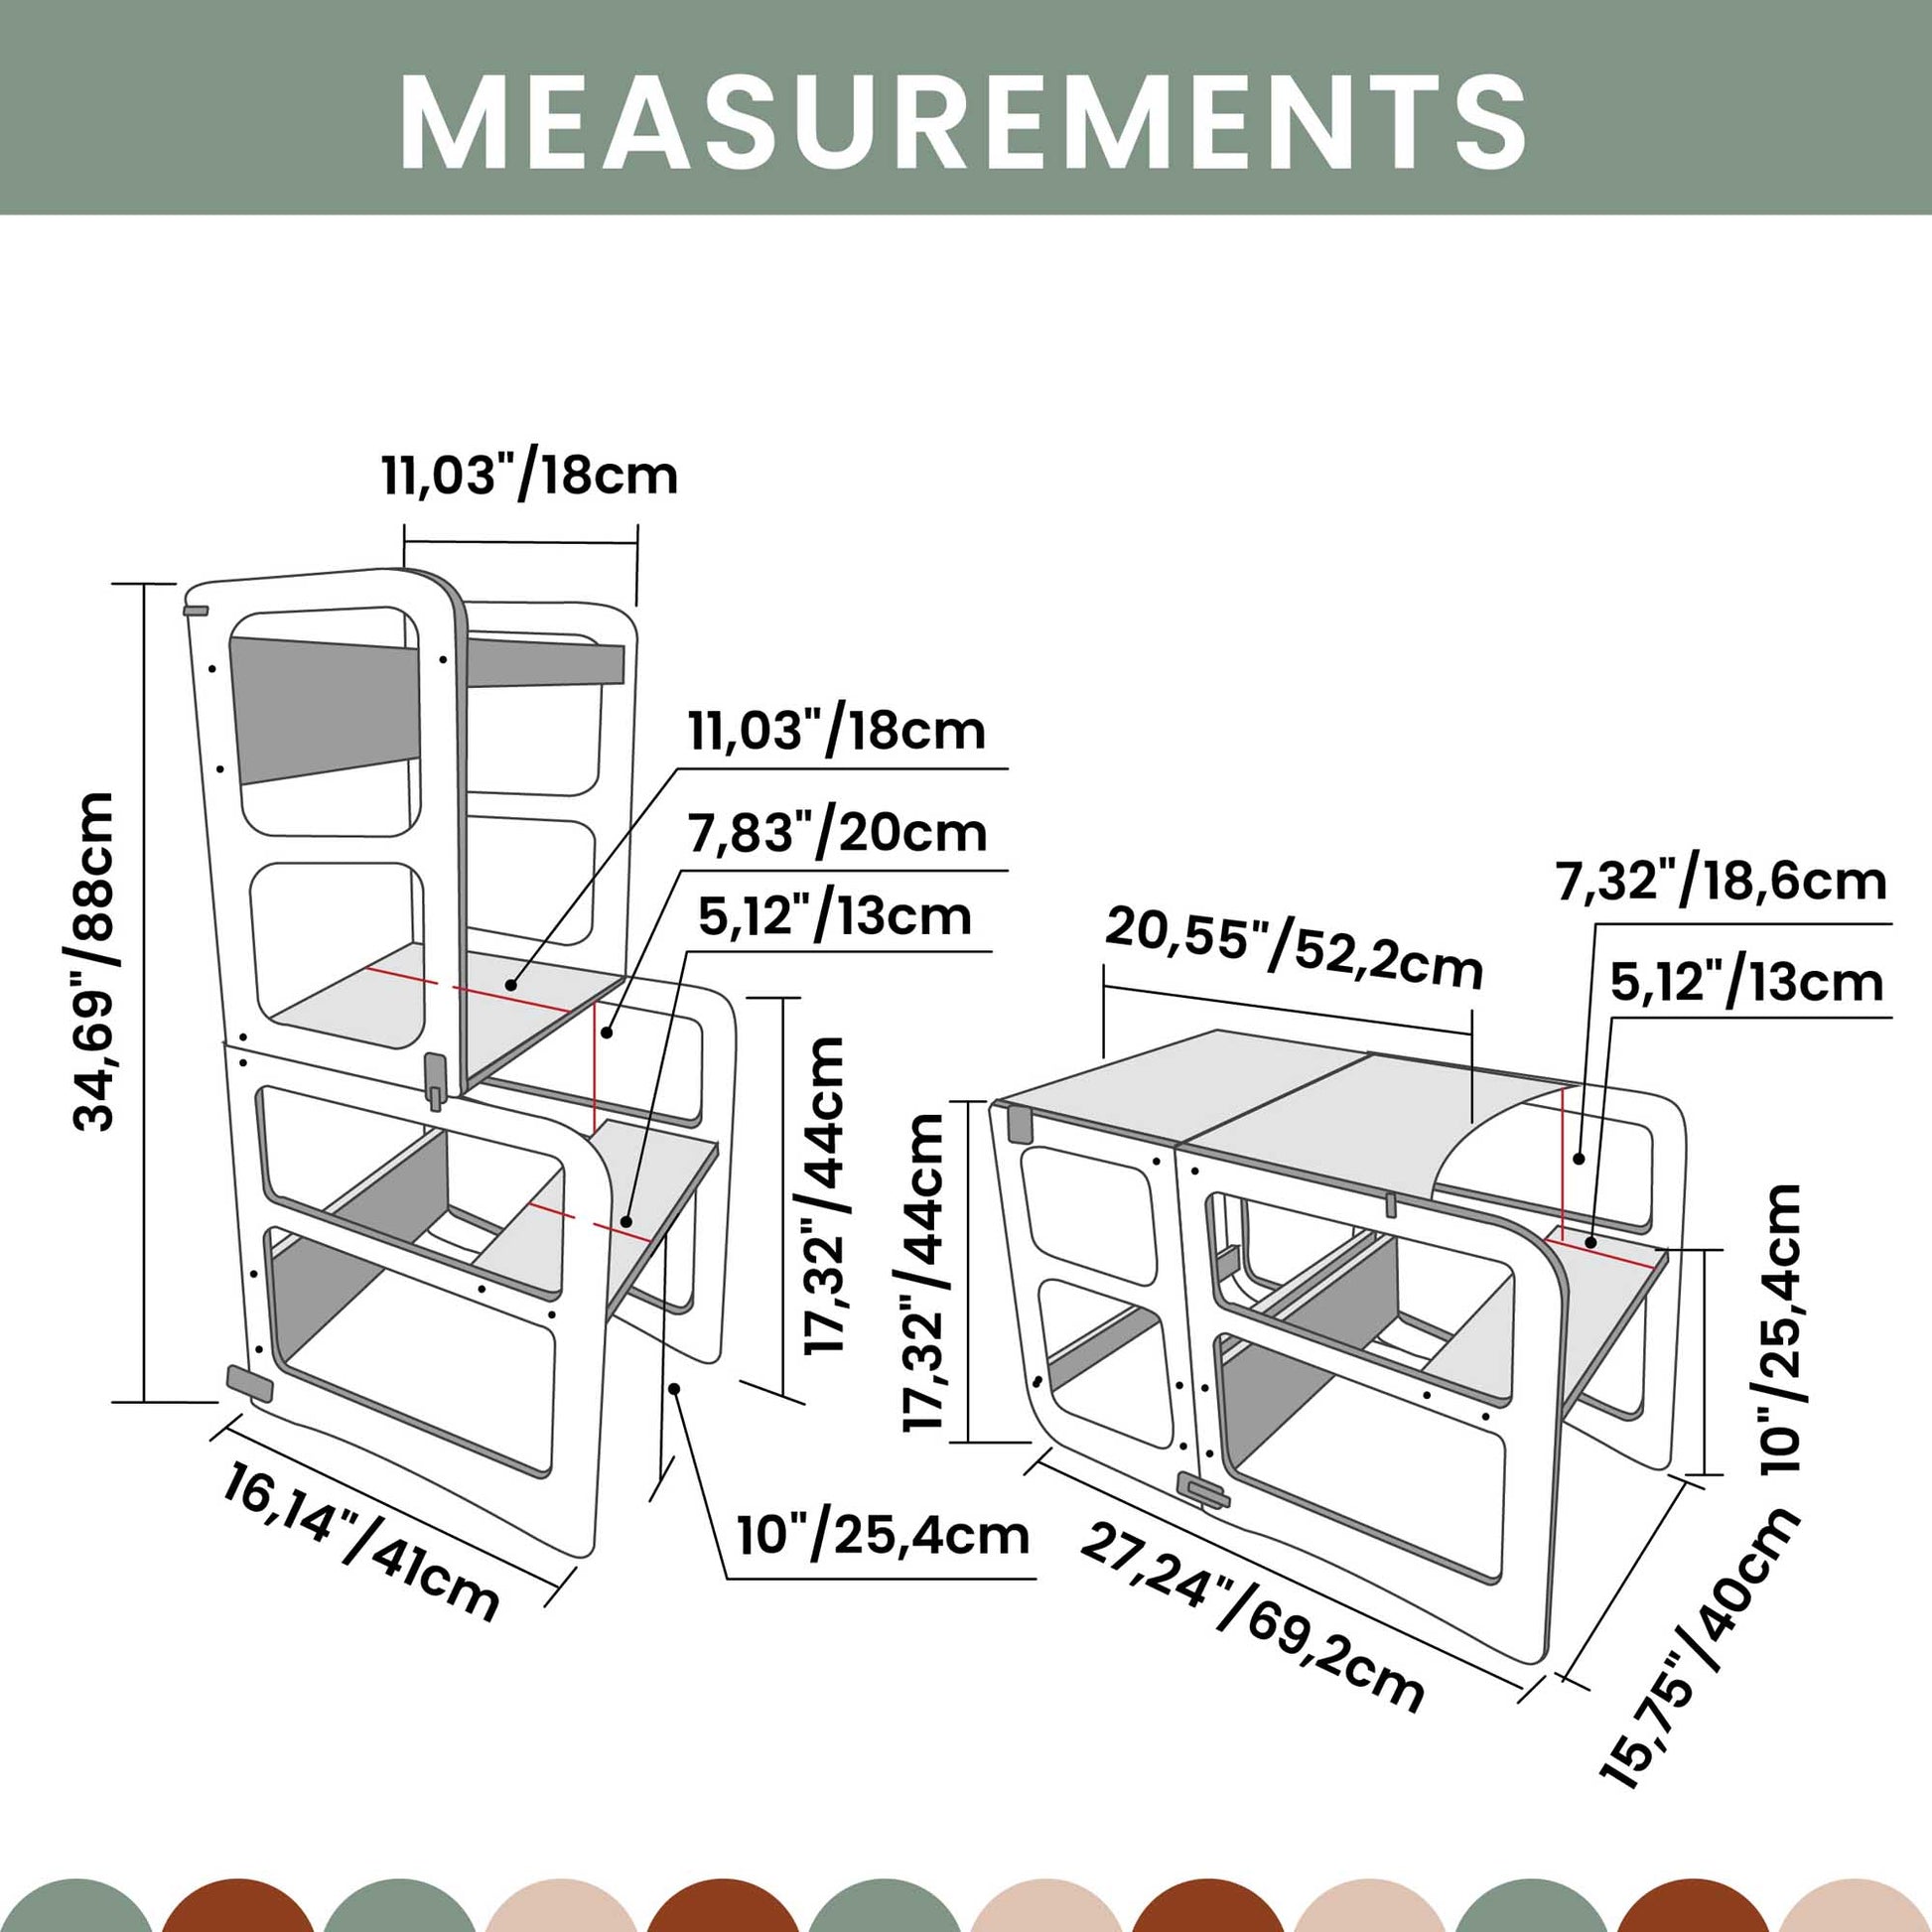 A diagram showing the measurements of a 2-in-1 transformable kitchen tower - table and chair set.